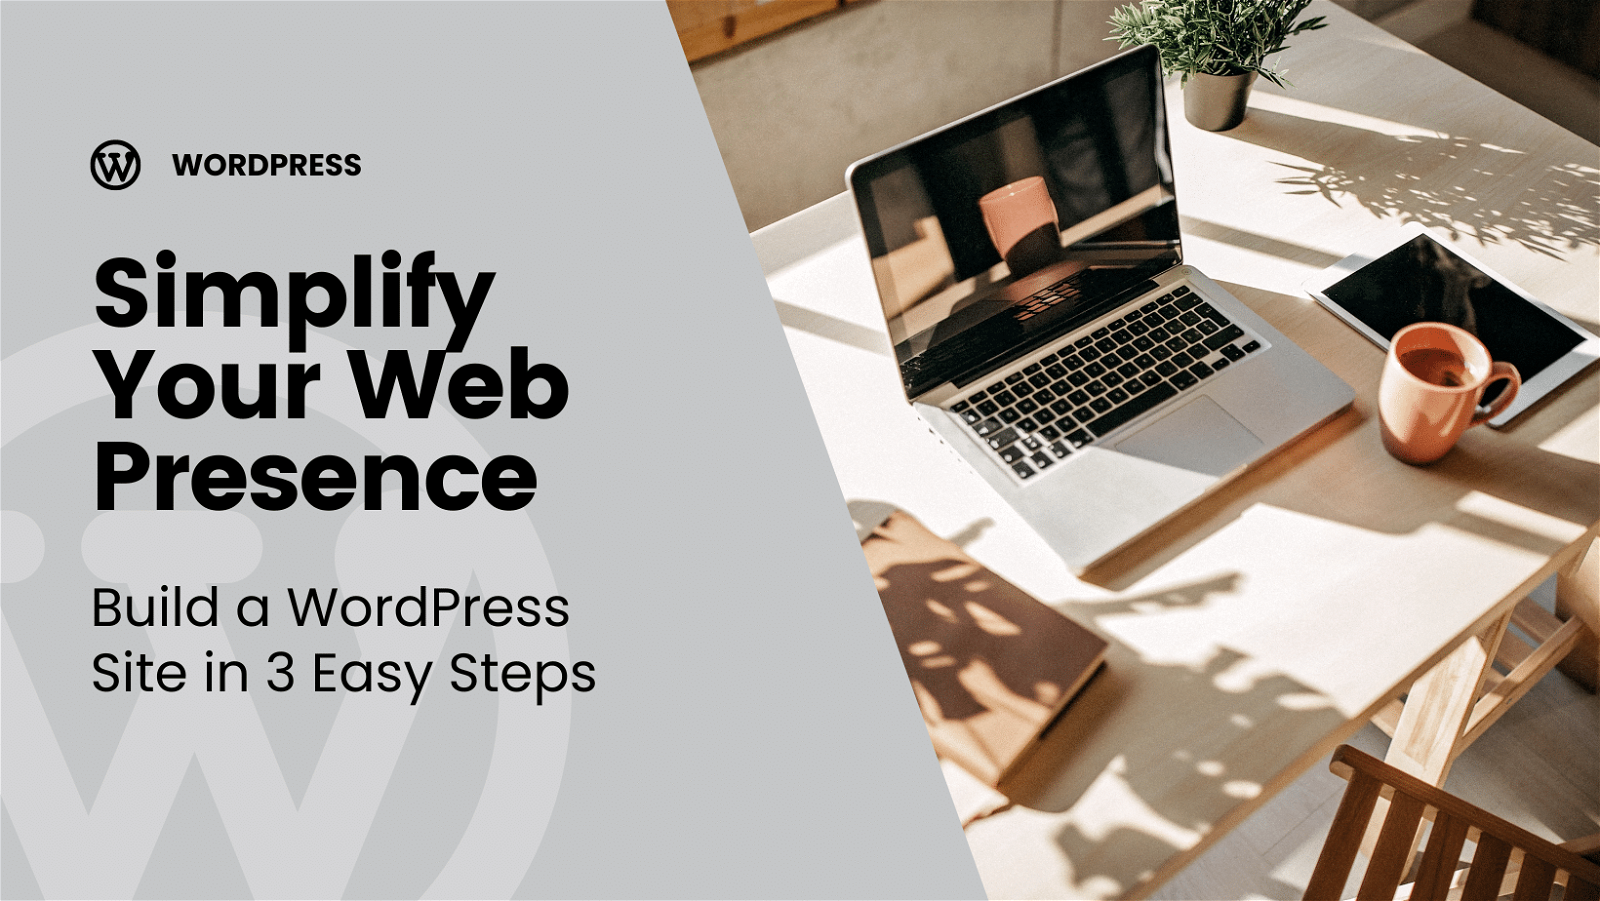 A promotional image featuring a laptop on a desk with the slogan "simplify your web presence - build a wordpress site in 3 easy steps" for wordpress.